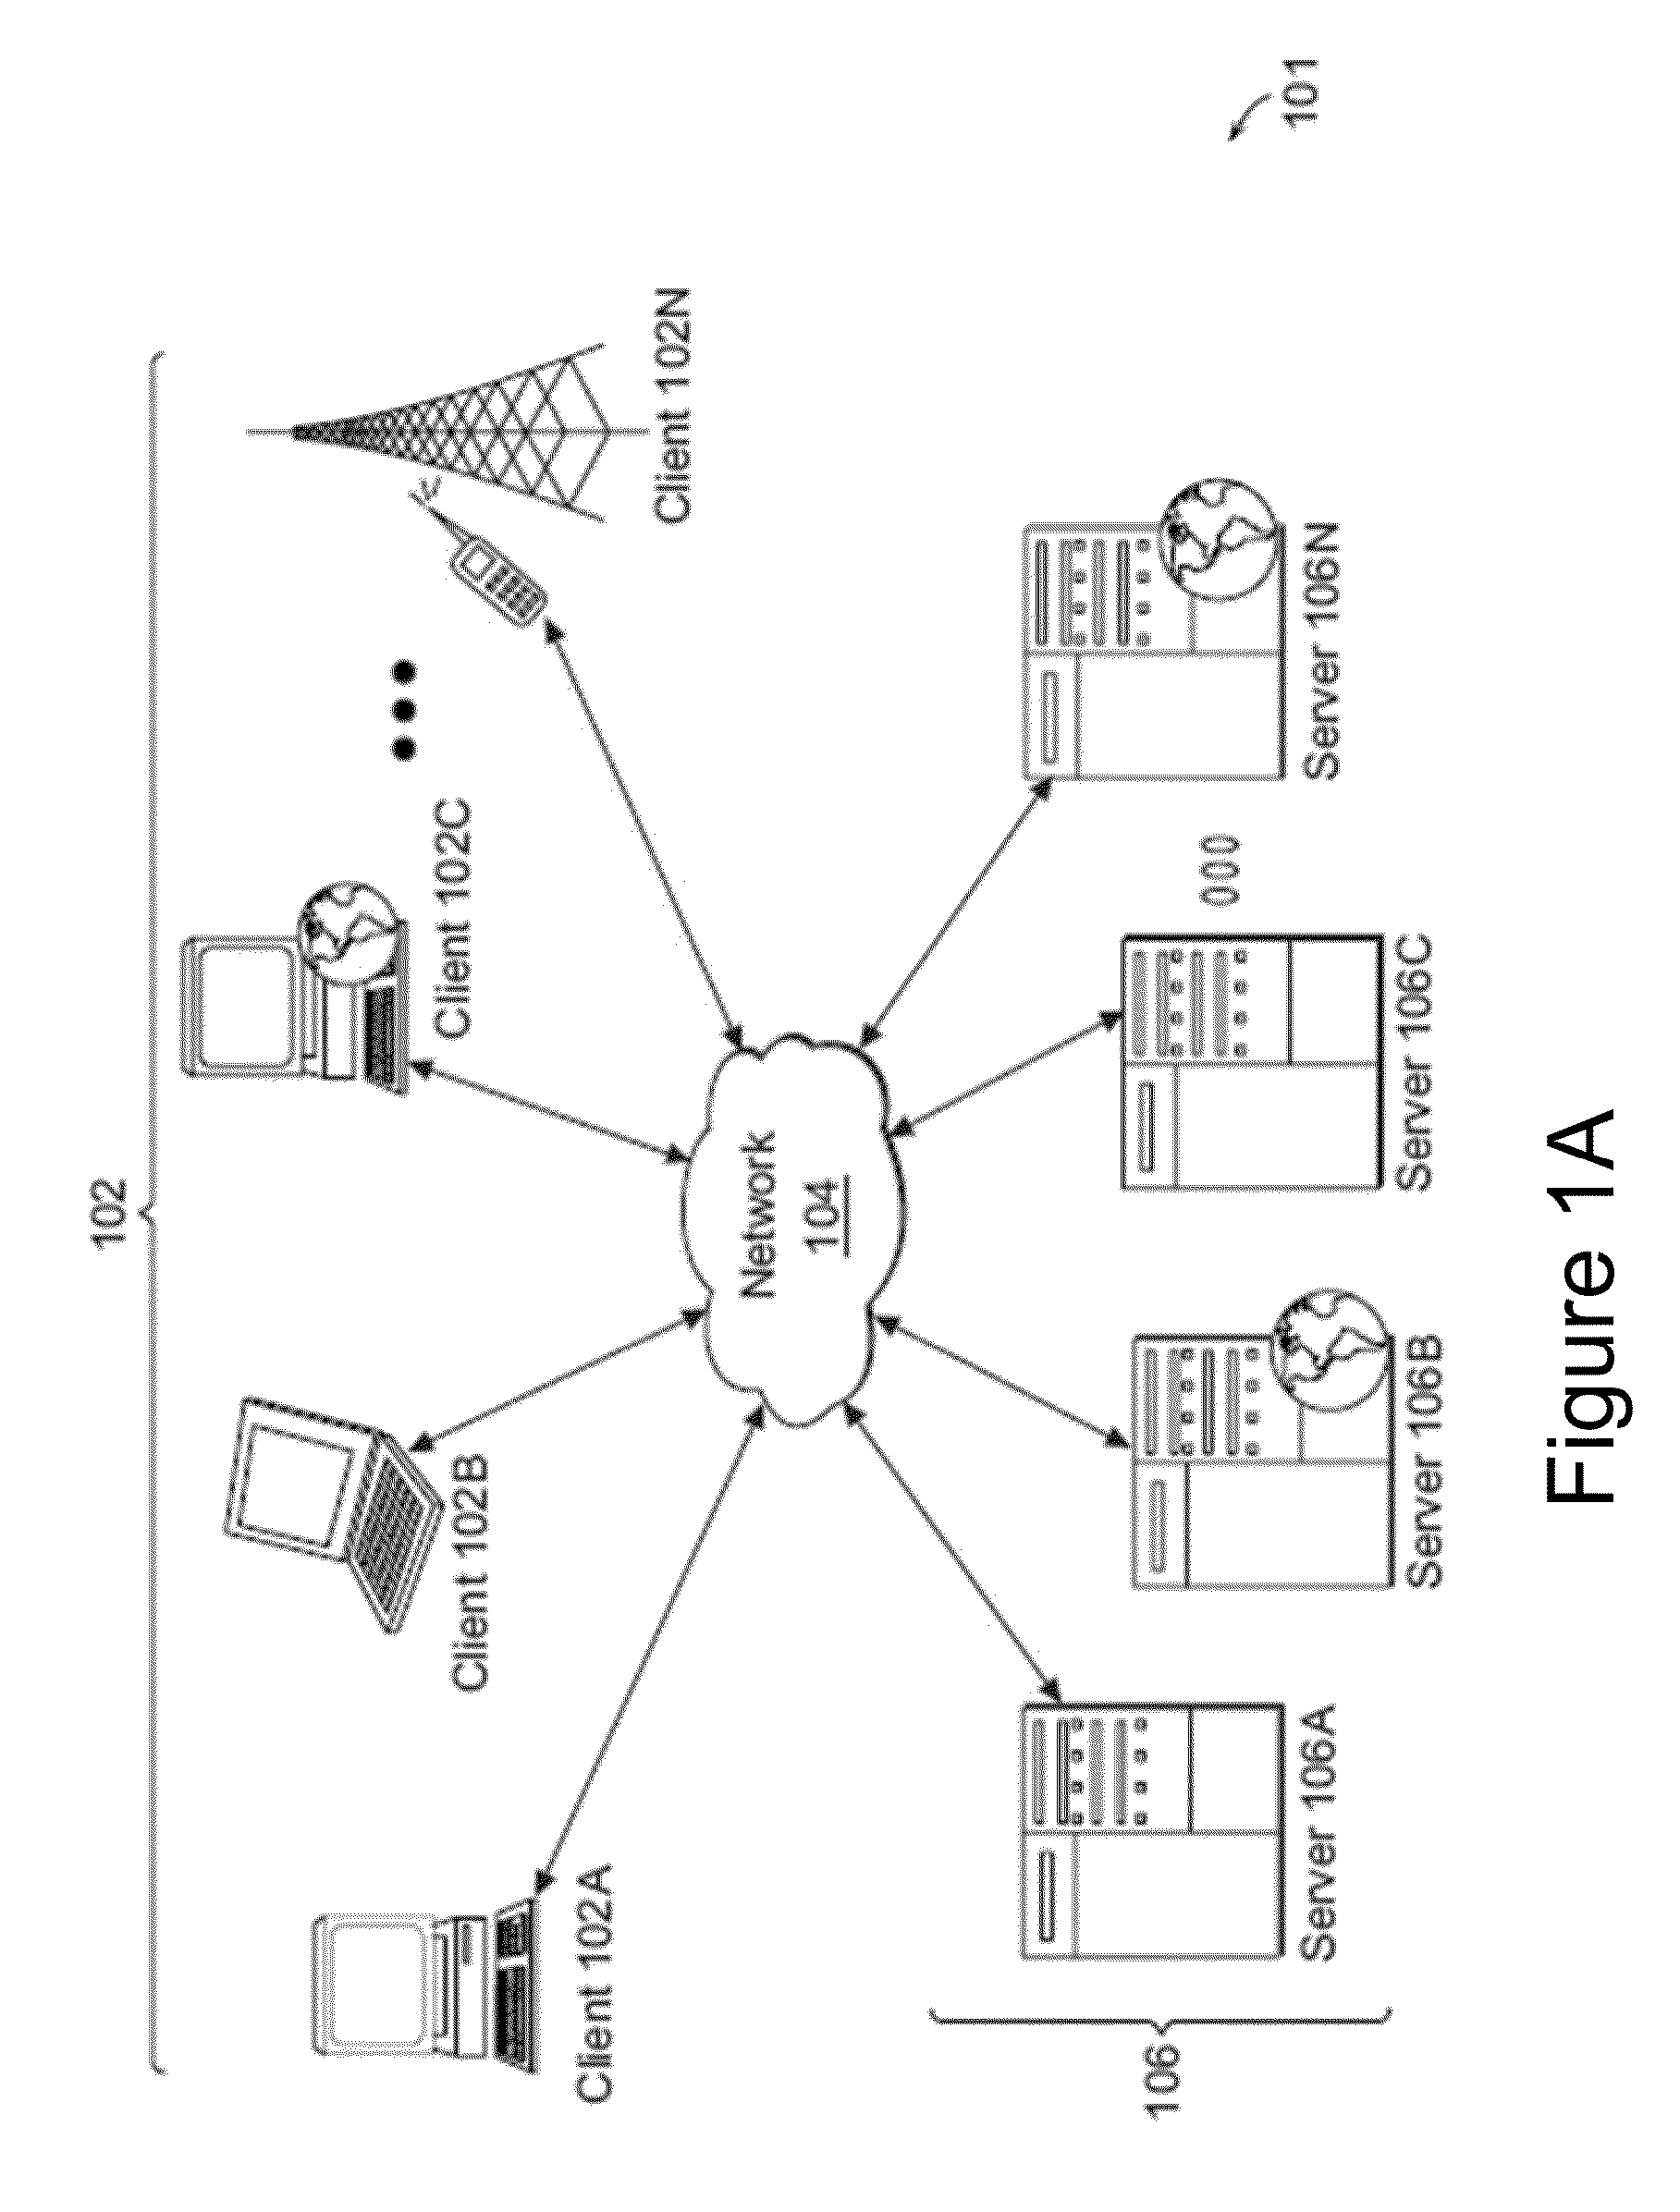 Systems and methods for dynamic media selection